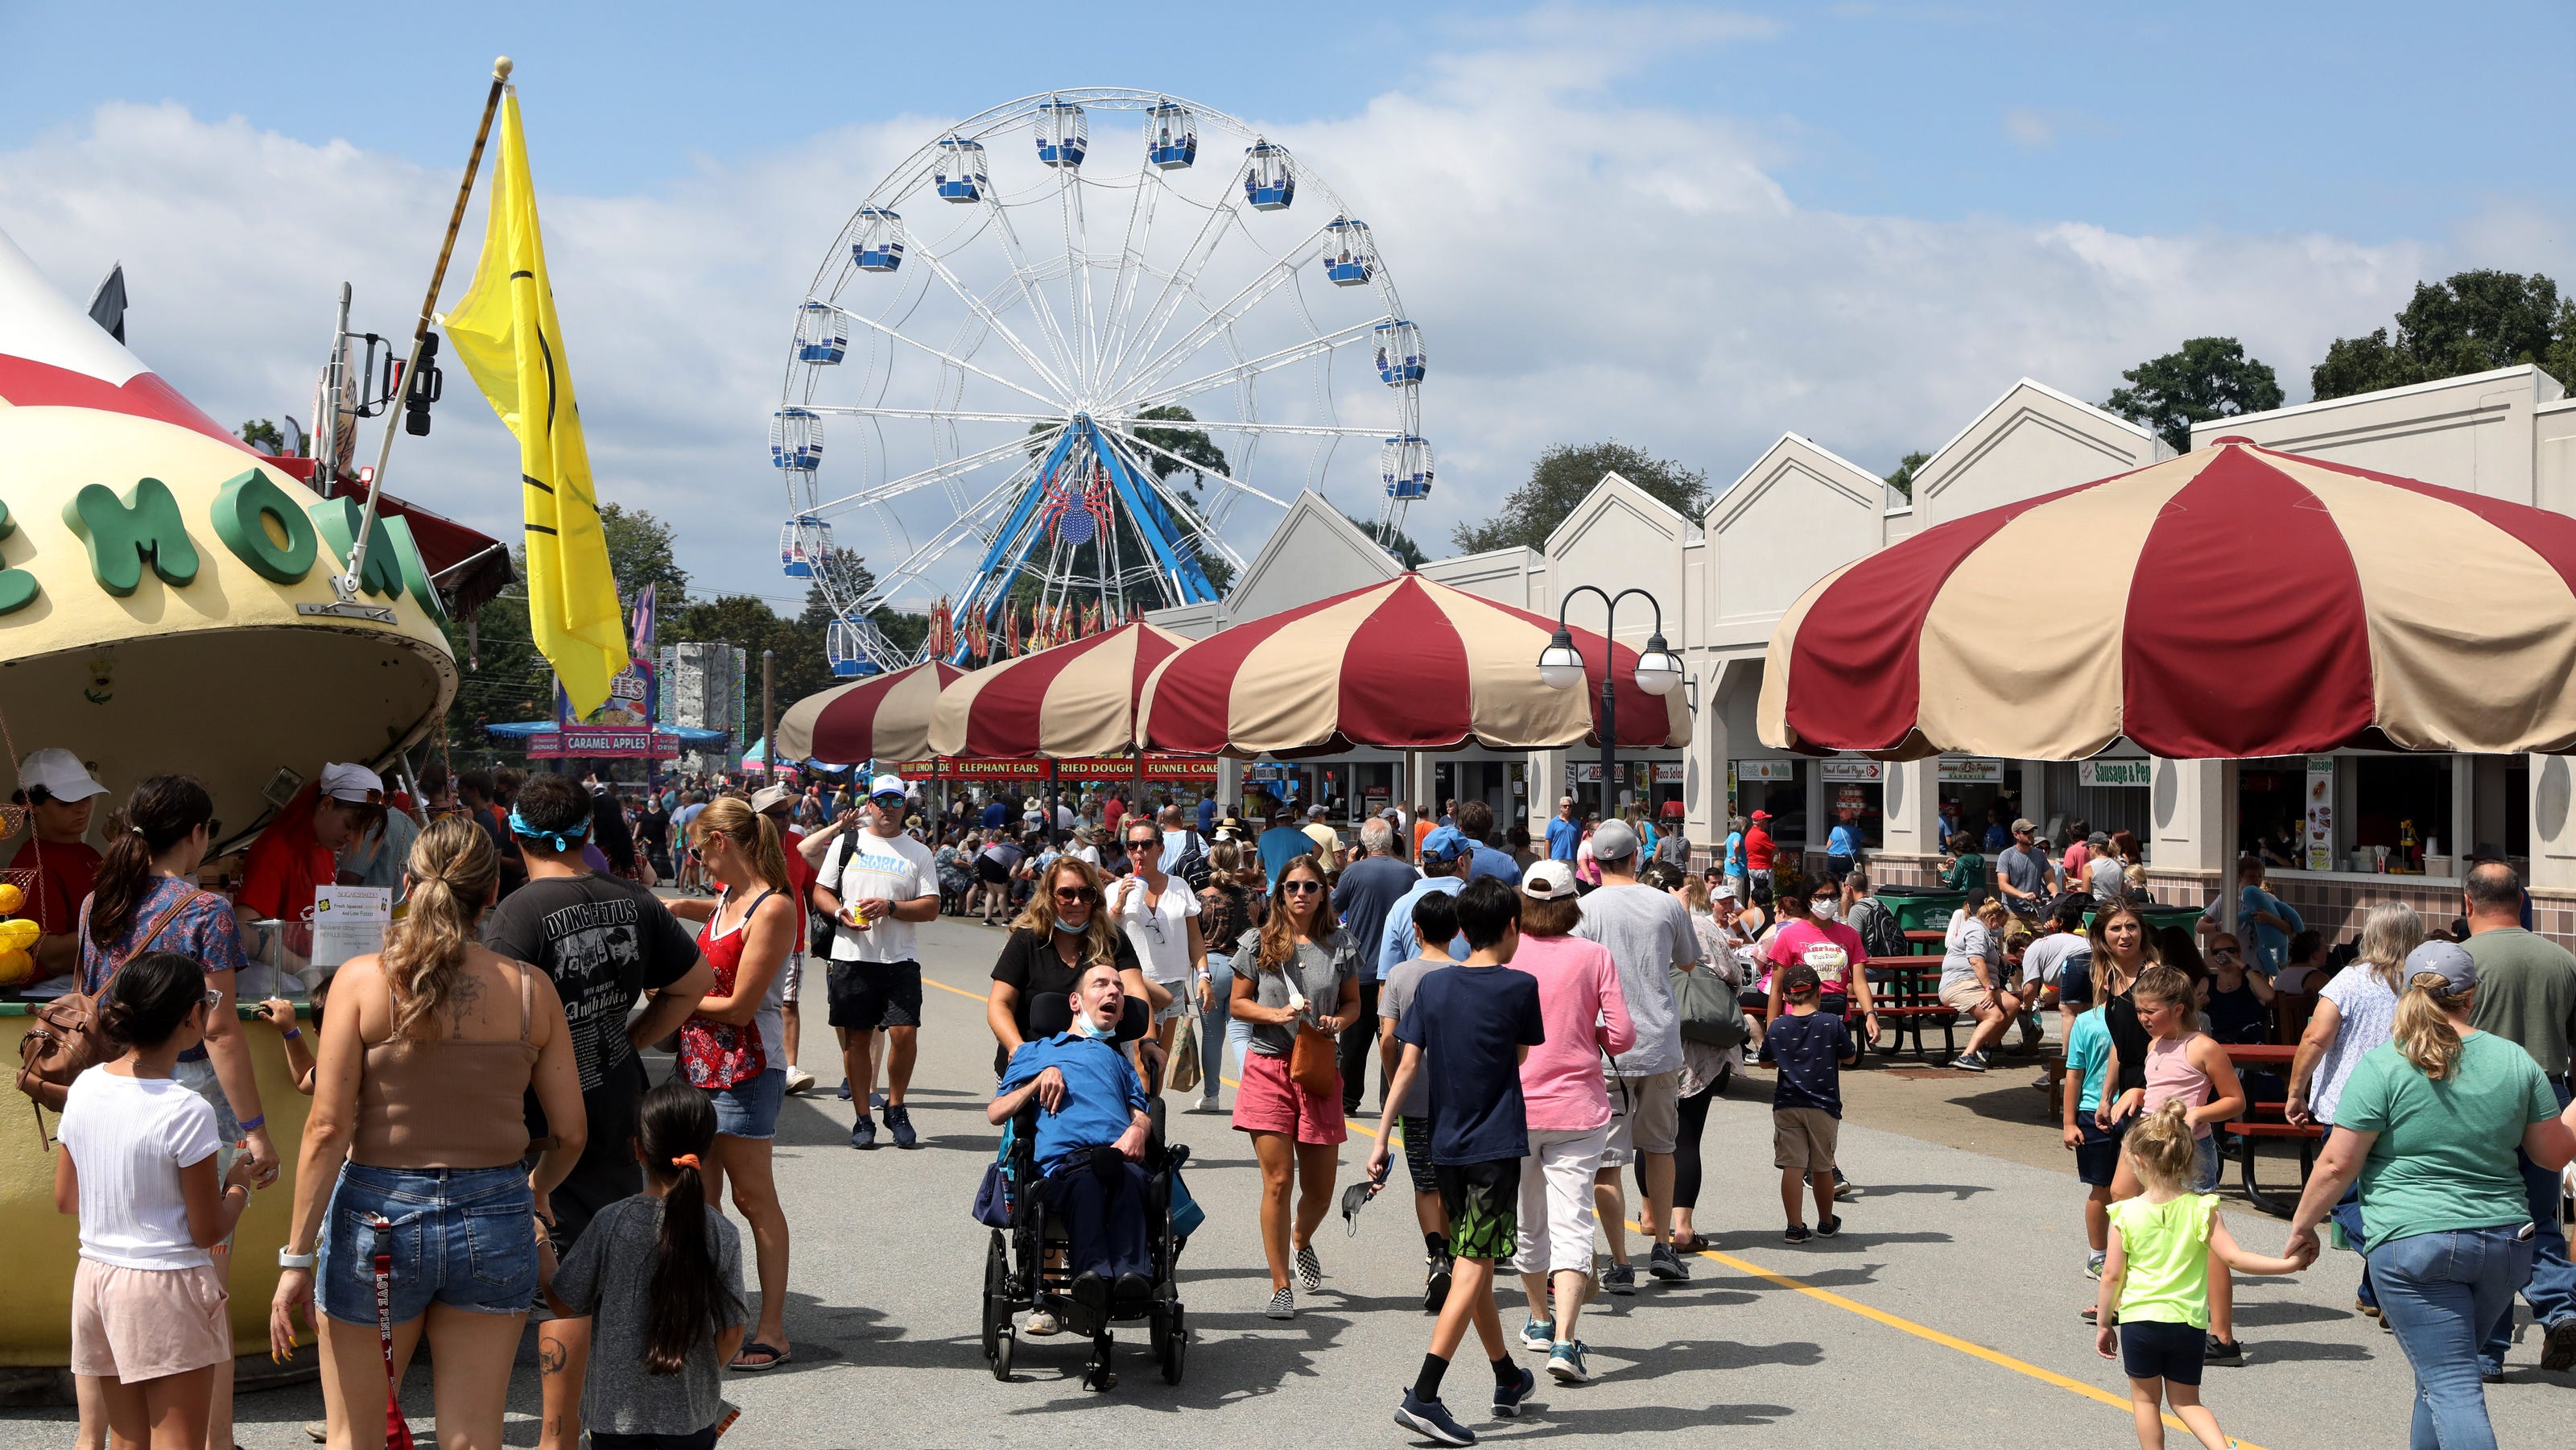 What to eat at the Dutchess County Fair 5 fun foods to sample